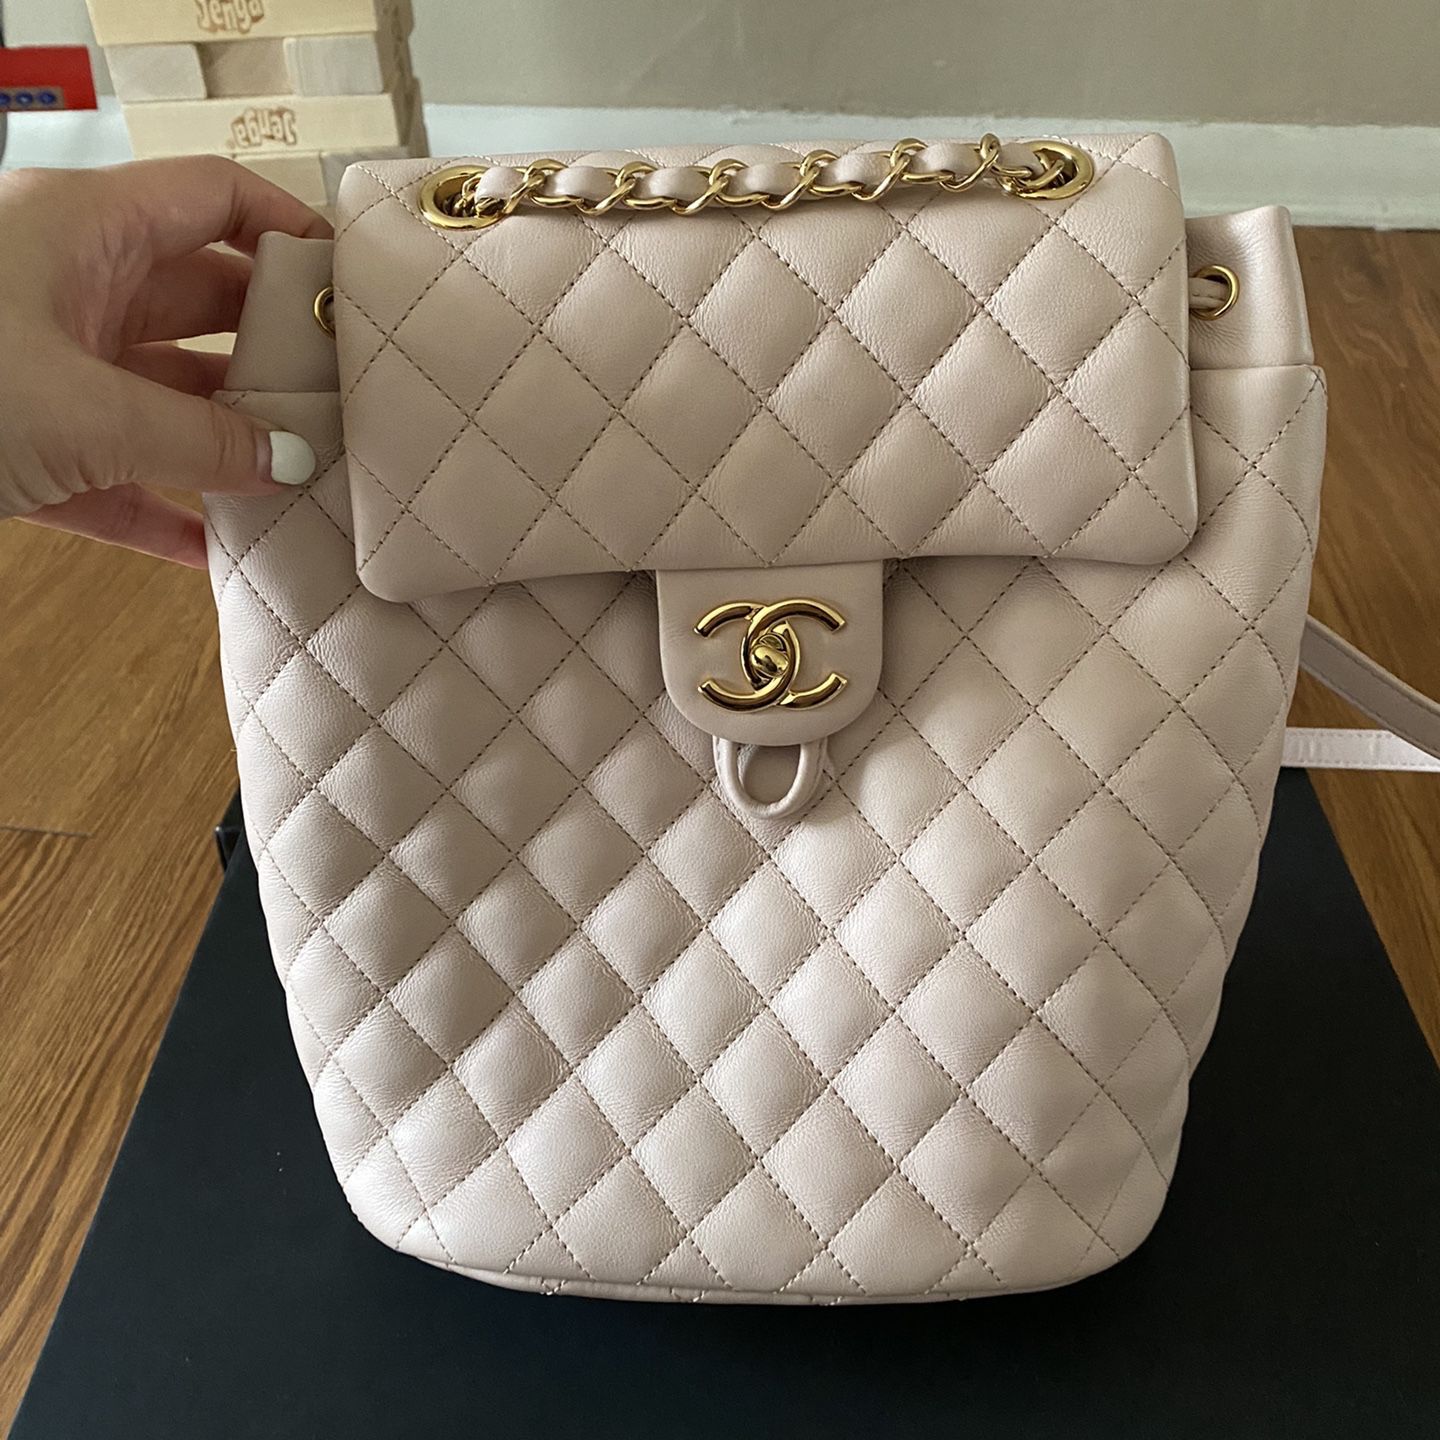 Chanel Flap Pink Bag AS1786 for Sale in Chicago, IL - OfferUp